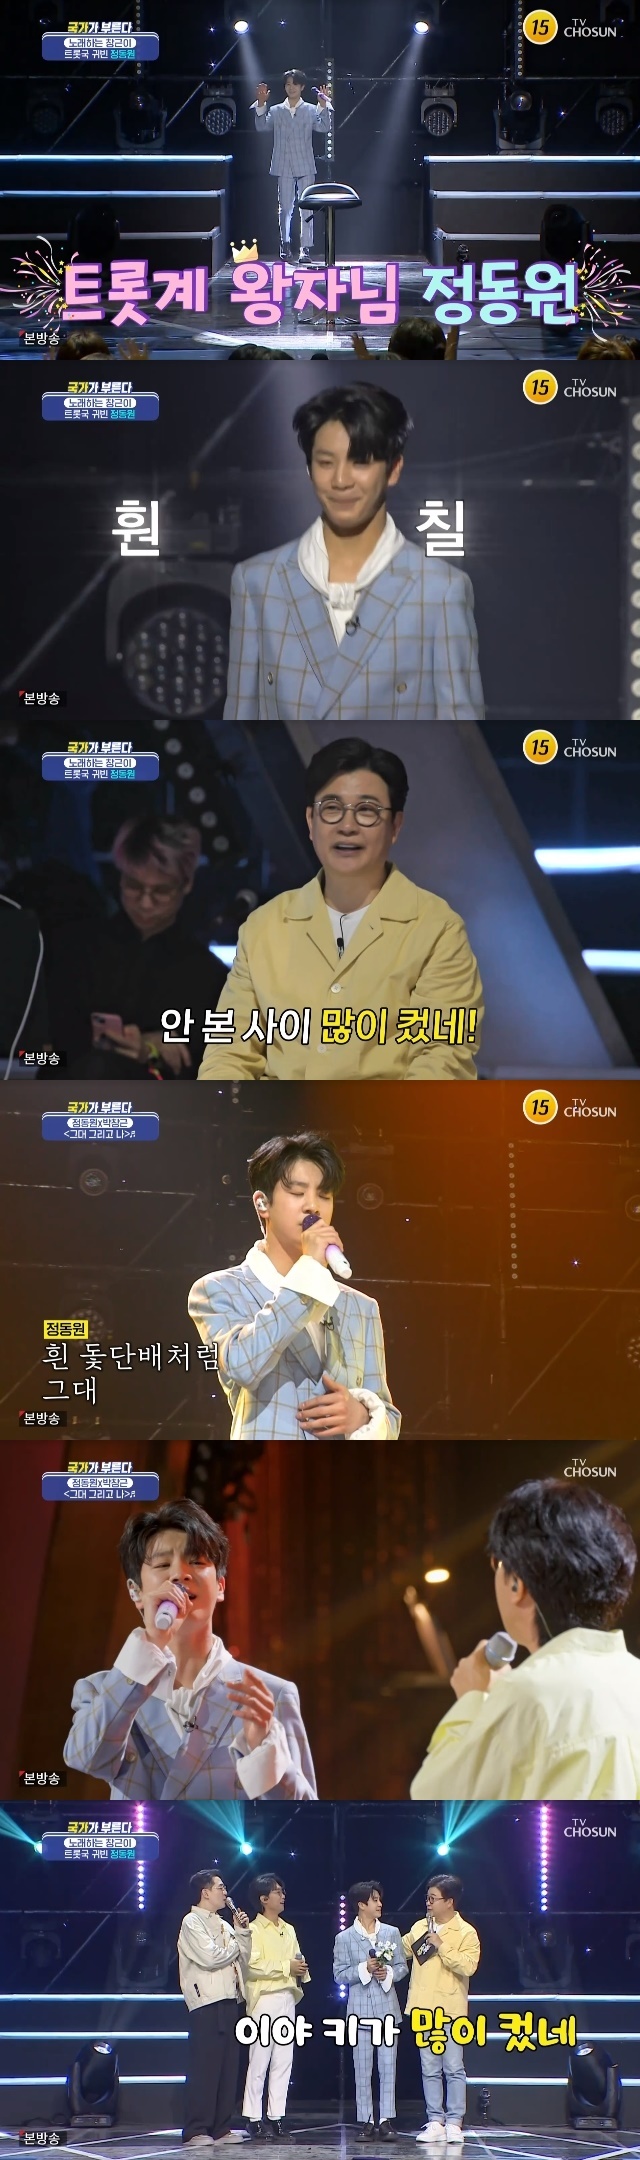 Kim Seong-joo was surprised by the storm growth of Jung Dong-won.In the 11th episode of the TV Chosun entertainment Song by Nationality (hereinafter referred to as The Department of Nationality), which aired on April 28, Trott-based prince Jung Dong-won appeared as a guest.On this day, the guest who visited the corner of Singing Chang Geun was Jung Dong-won, a prince of trot.In the appearance of Jung Dong-won, who became more prominent, Baek Ji-young praised look at the tall and look good-looking, and Kim Seong-joo also said, It was a lot bigger than I did not see.Jung Dong-won sang You and Me with change-geun parkKim Seong-joo, who later welcomed Jung Dong-won, said, I was tall.I came up almost like me, he said again, and the boom attracted attention as he said, Now is the mans figure. 